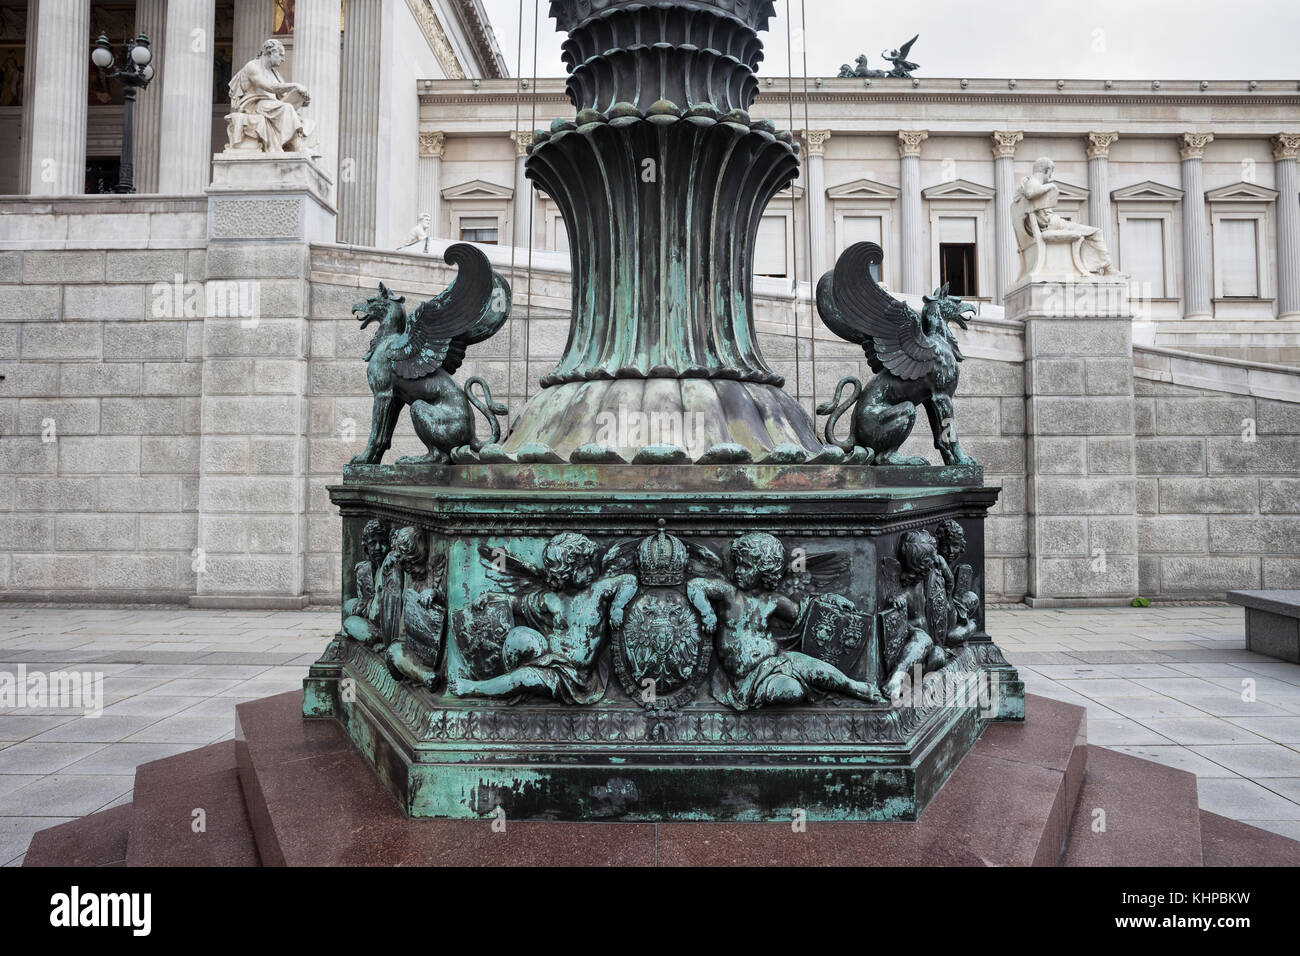 Griffins and herubs sculptures at the ornate bottom of a mast in front of Austrian Parliament Building in Vienna city, Austria Stock Photo